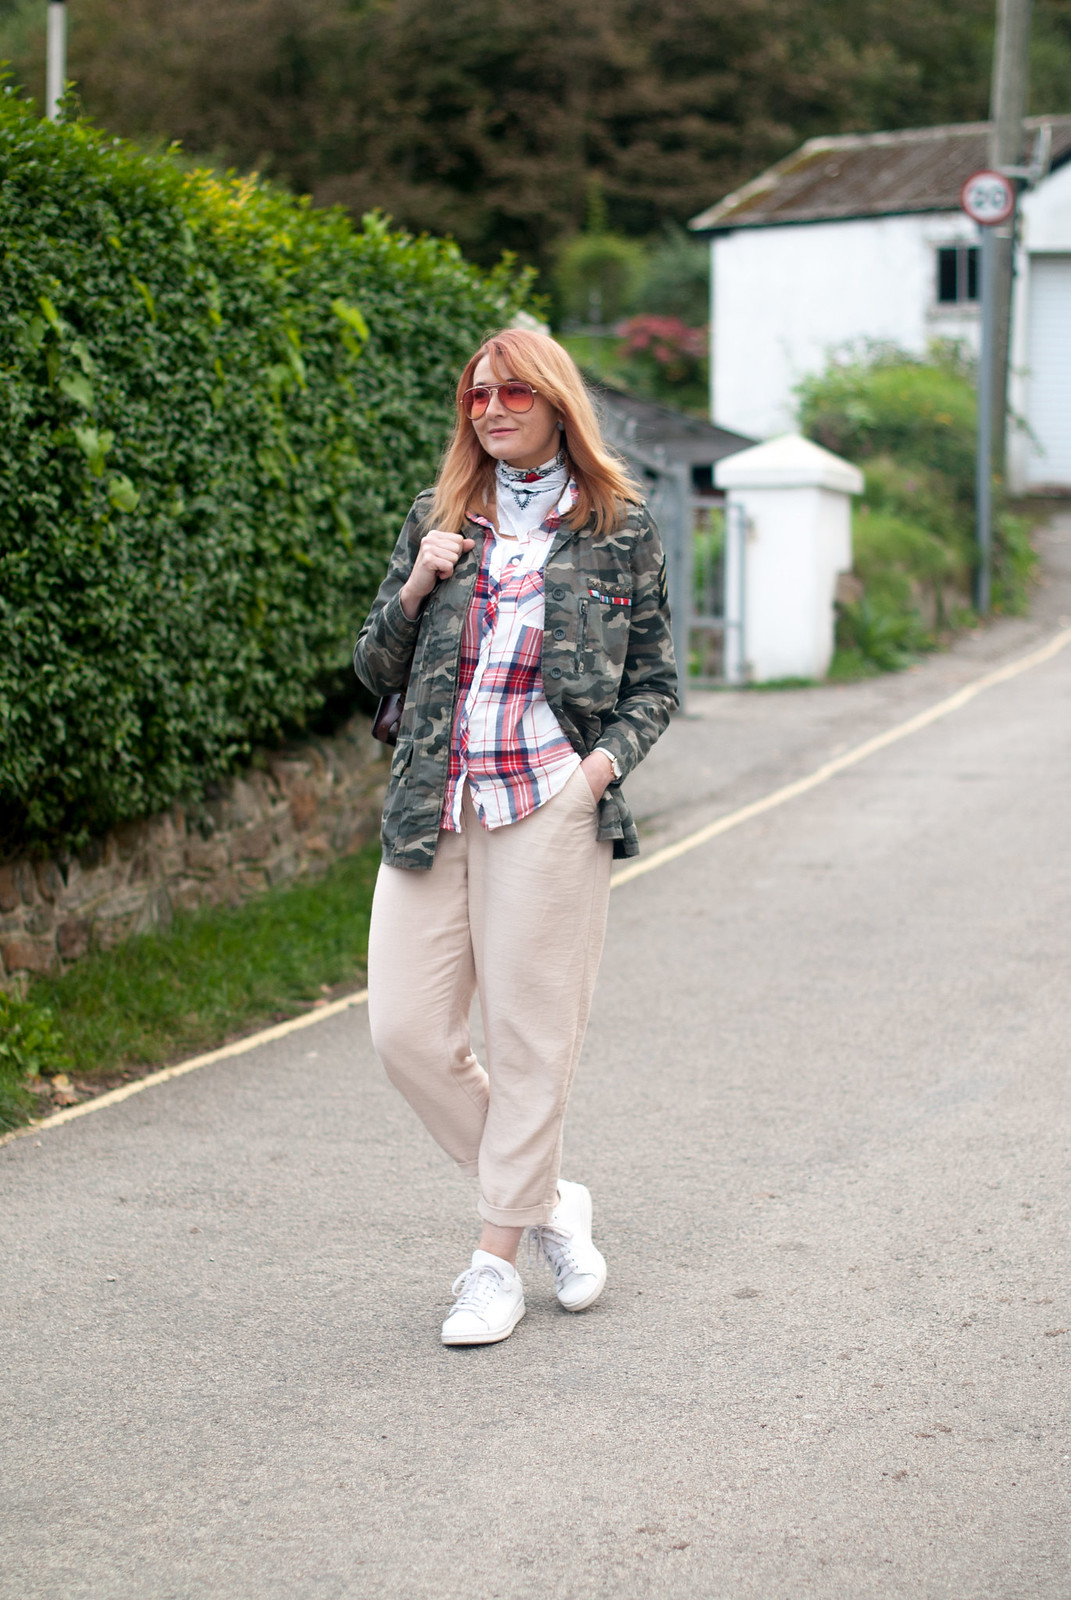 Super casual autumnal pattern mix: Camo jacket check plaid shirt cream peg pants trousers white Adidas Stan Smiths | Not Dressed As Lamb, over 40 style